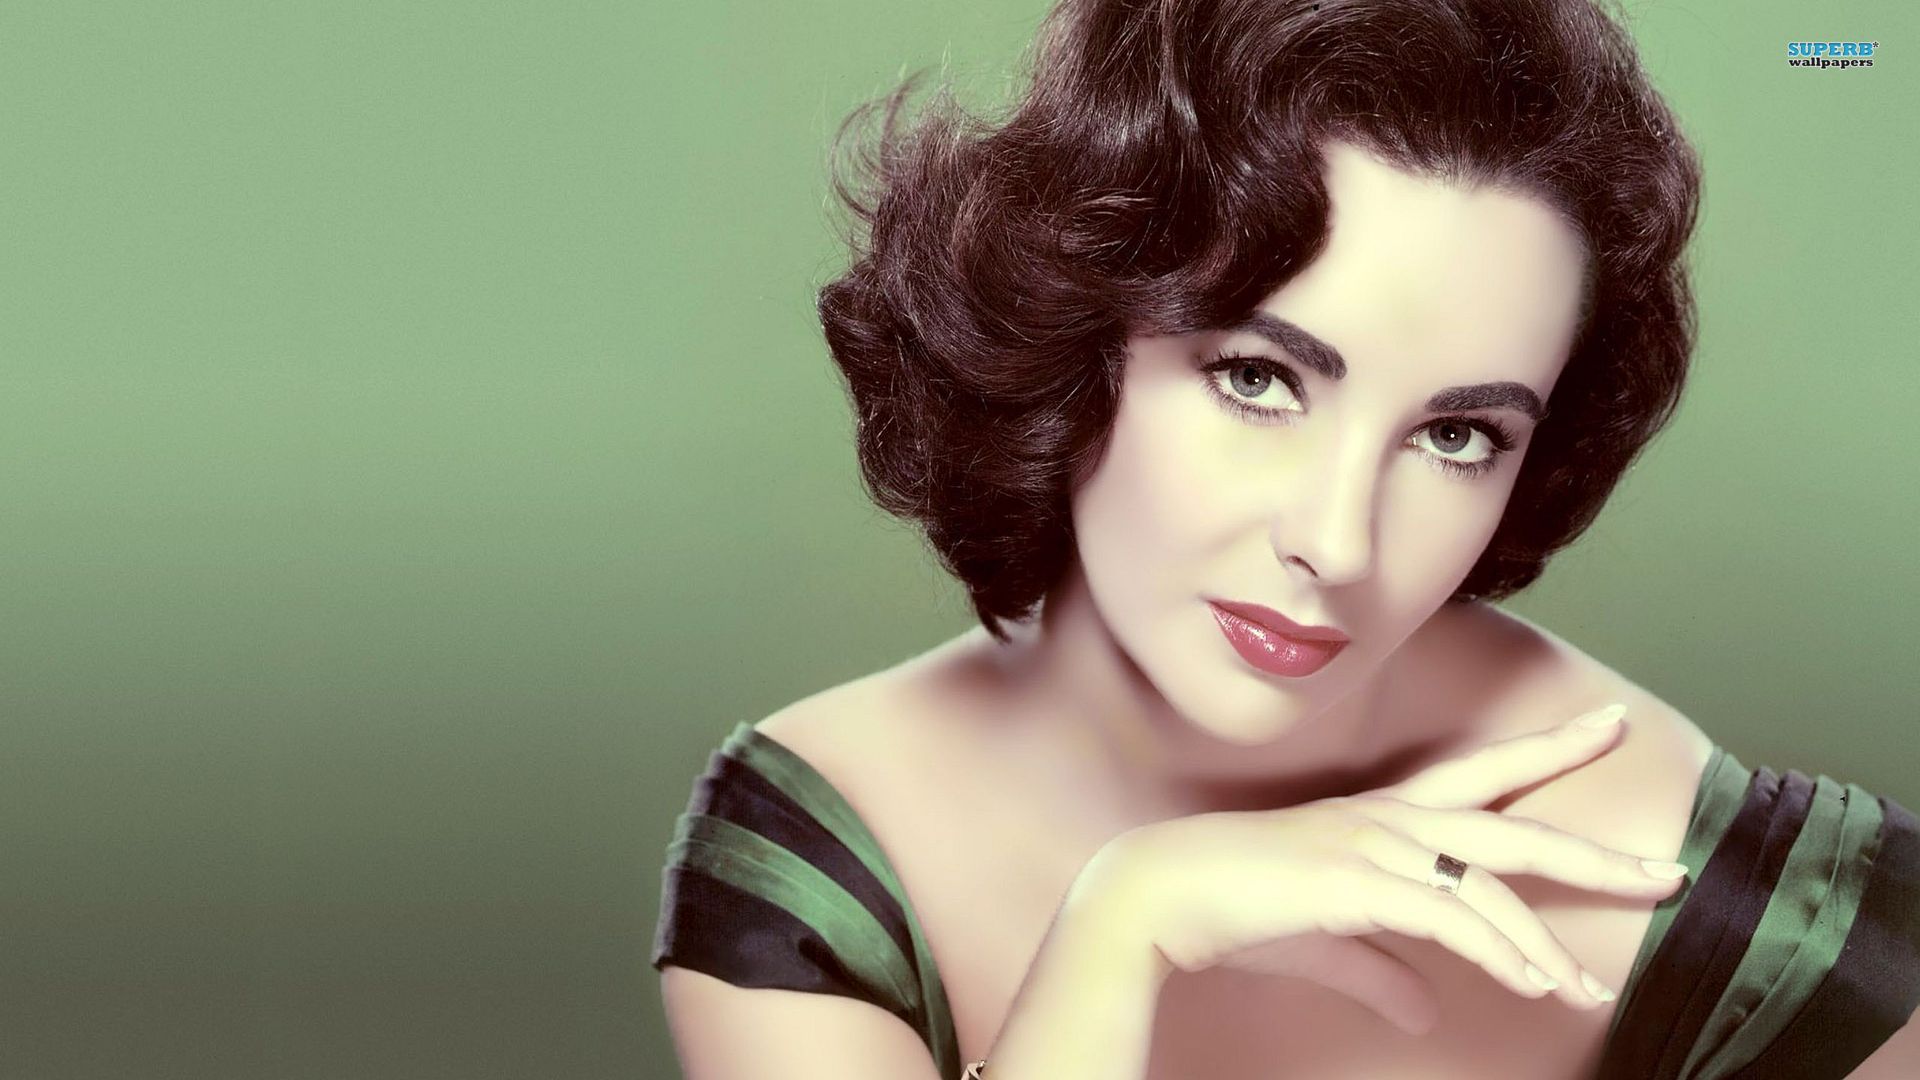 Elizabeth Taylor Wallpapers High Resolution and Quality Download